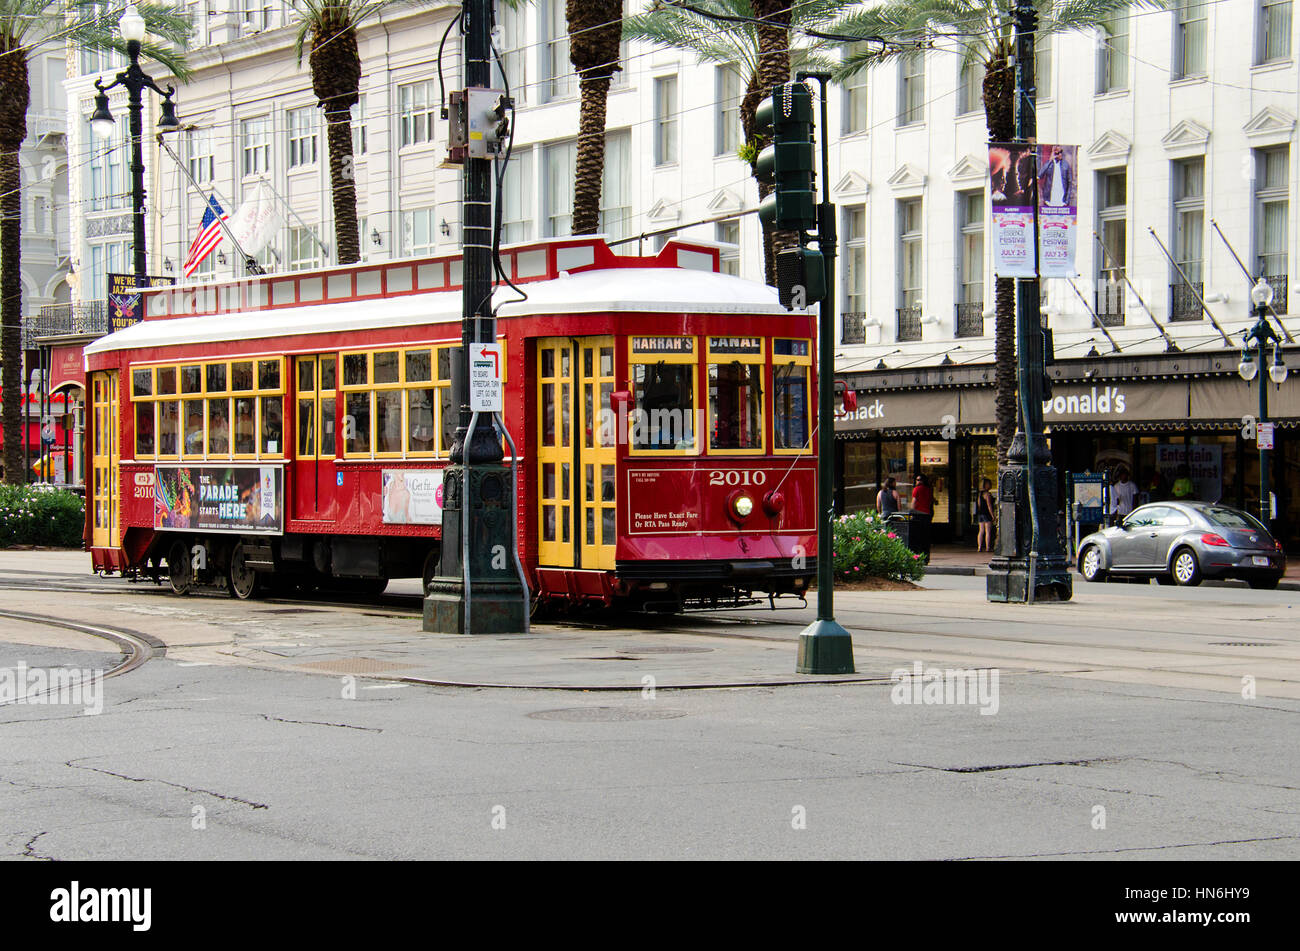 New Orleans, USA - July 8, 2015: A Canal Street line streetcar rides in the downtown of New Orleans, Louisiana. Stock Photo